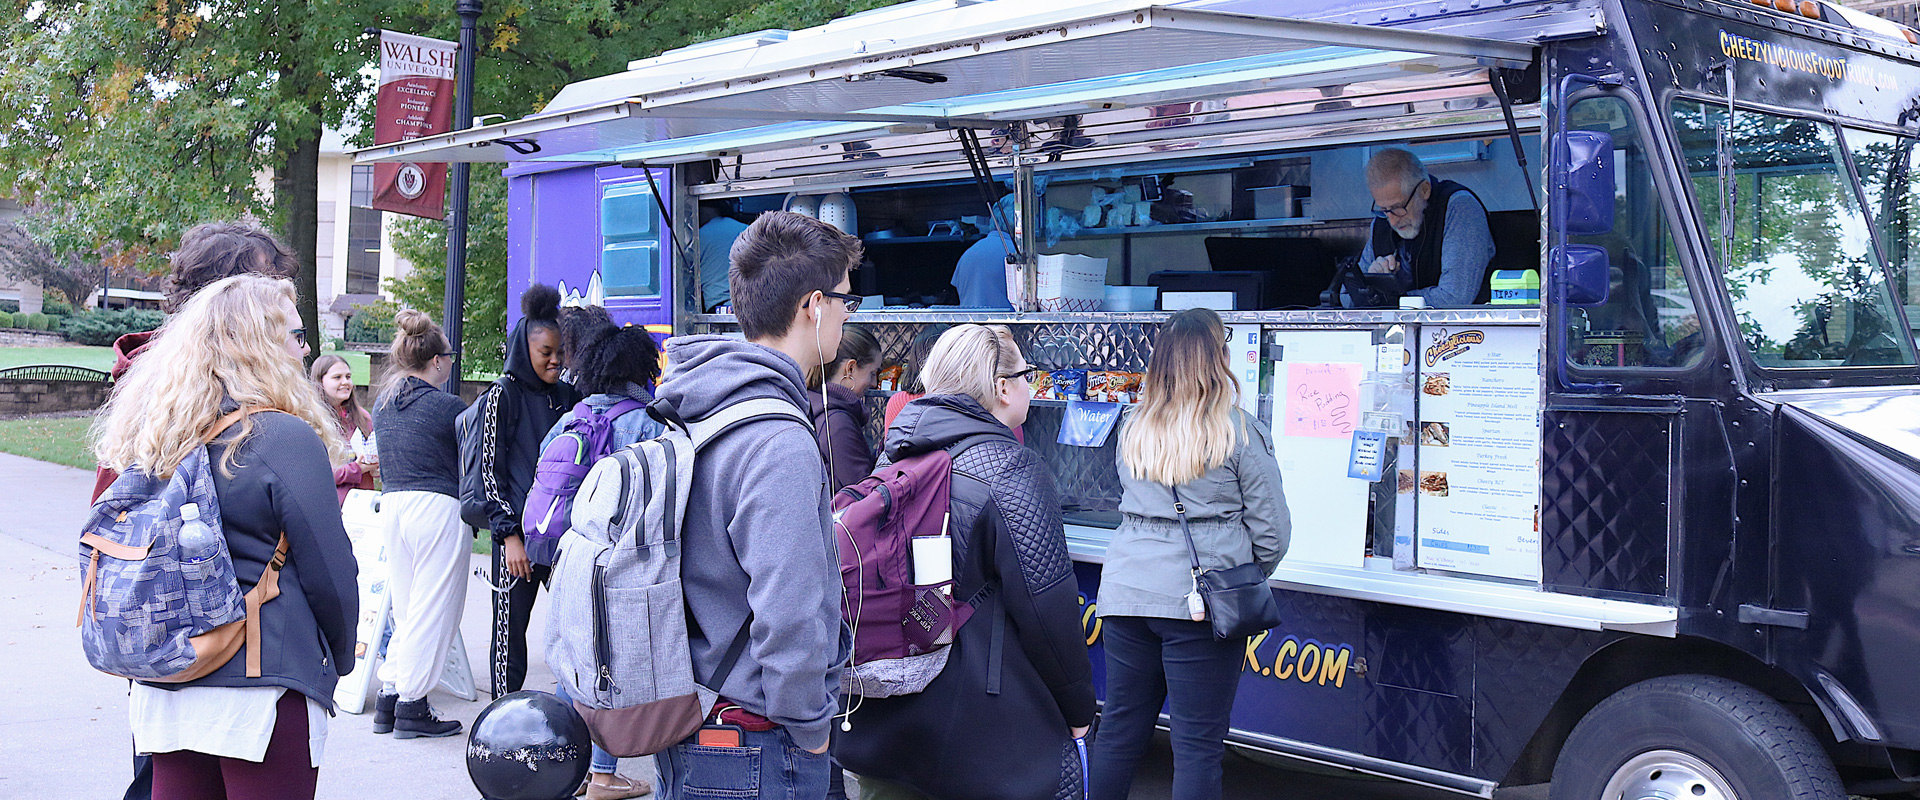 photo of Walsh students in line at a food truck on campus